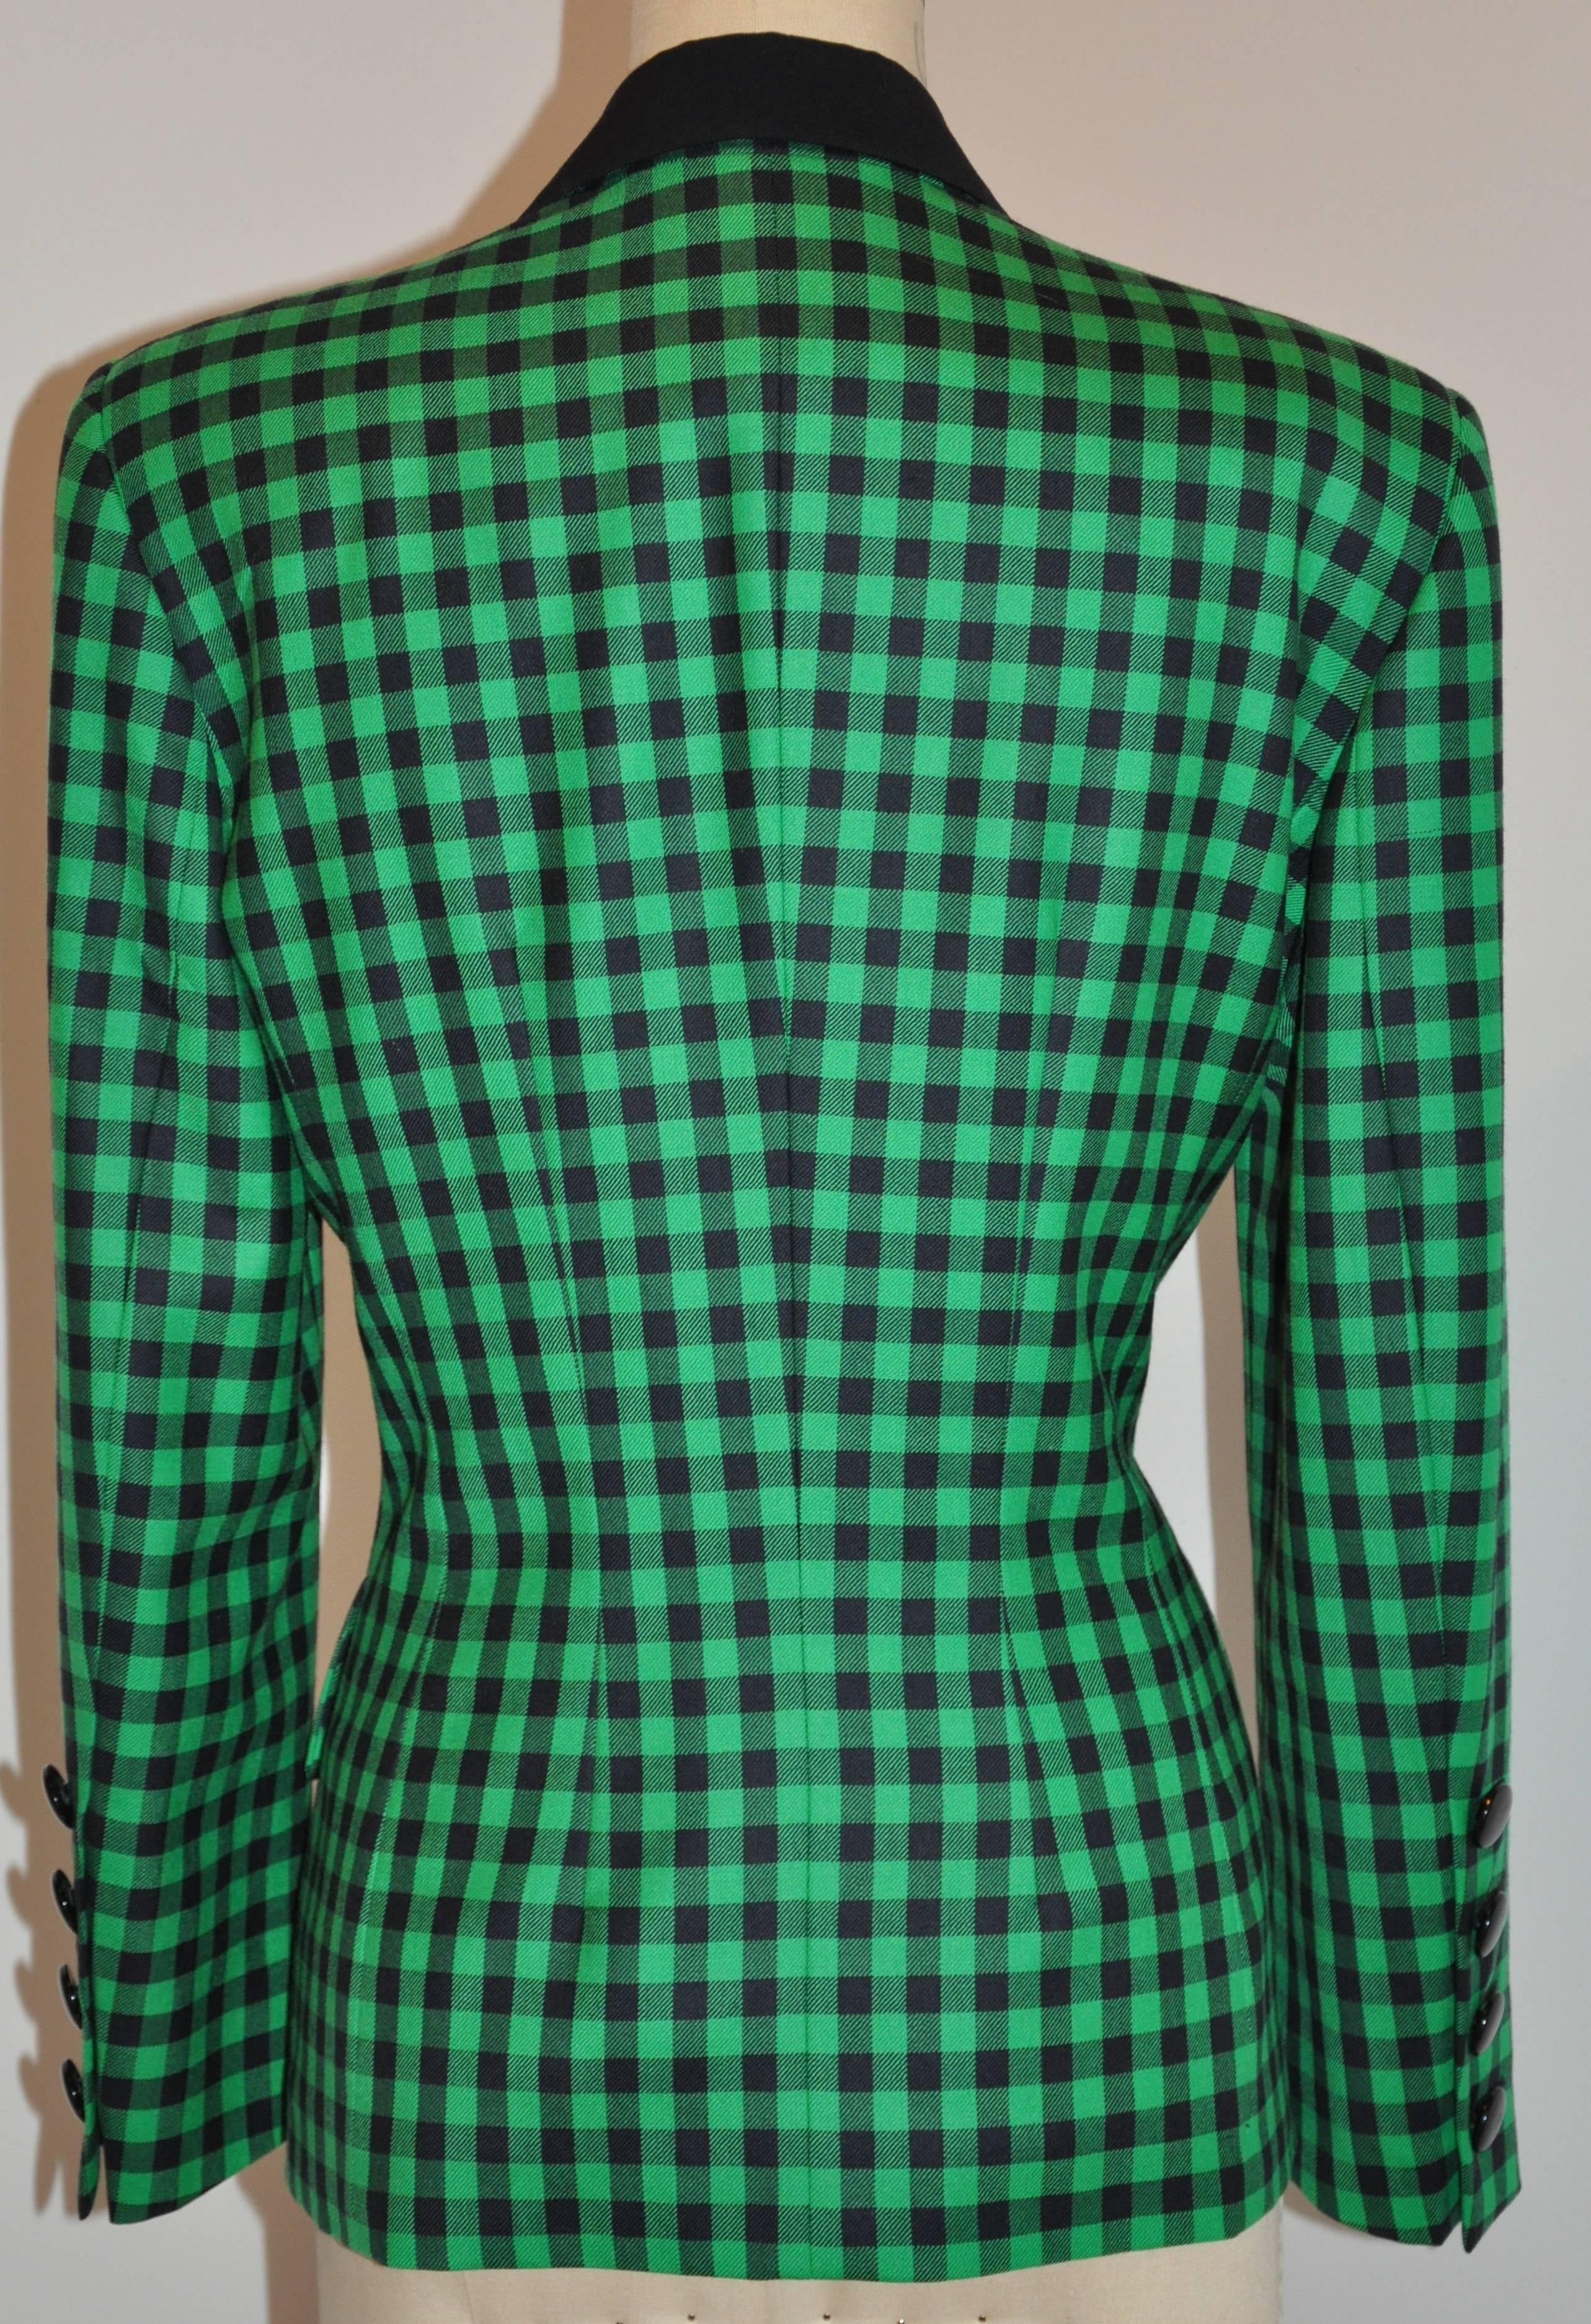           Escada bold green and black checkered blazer bu Margaretha Ley is detailed with two set-in pockets as well as flaps in front with four buttons on each cuff. The shoulders measures 17